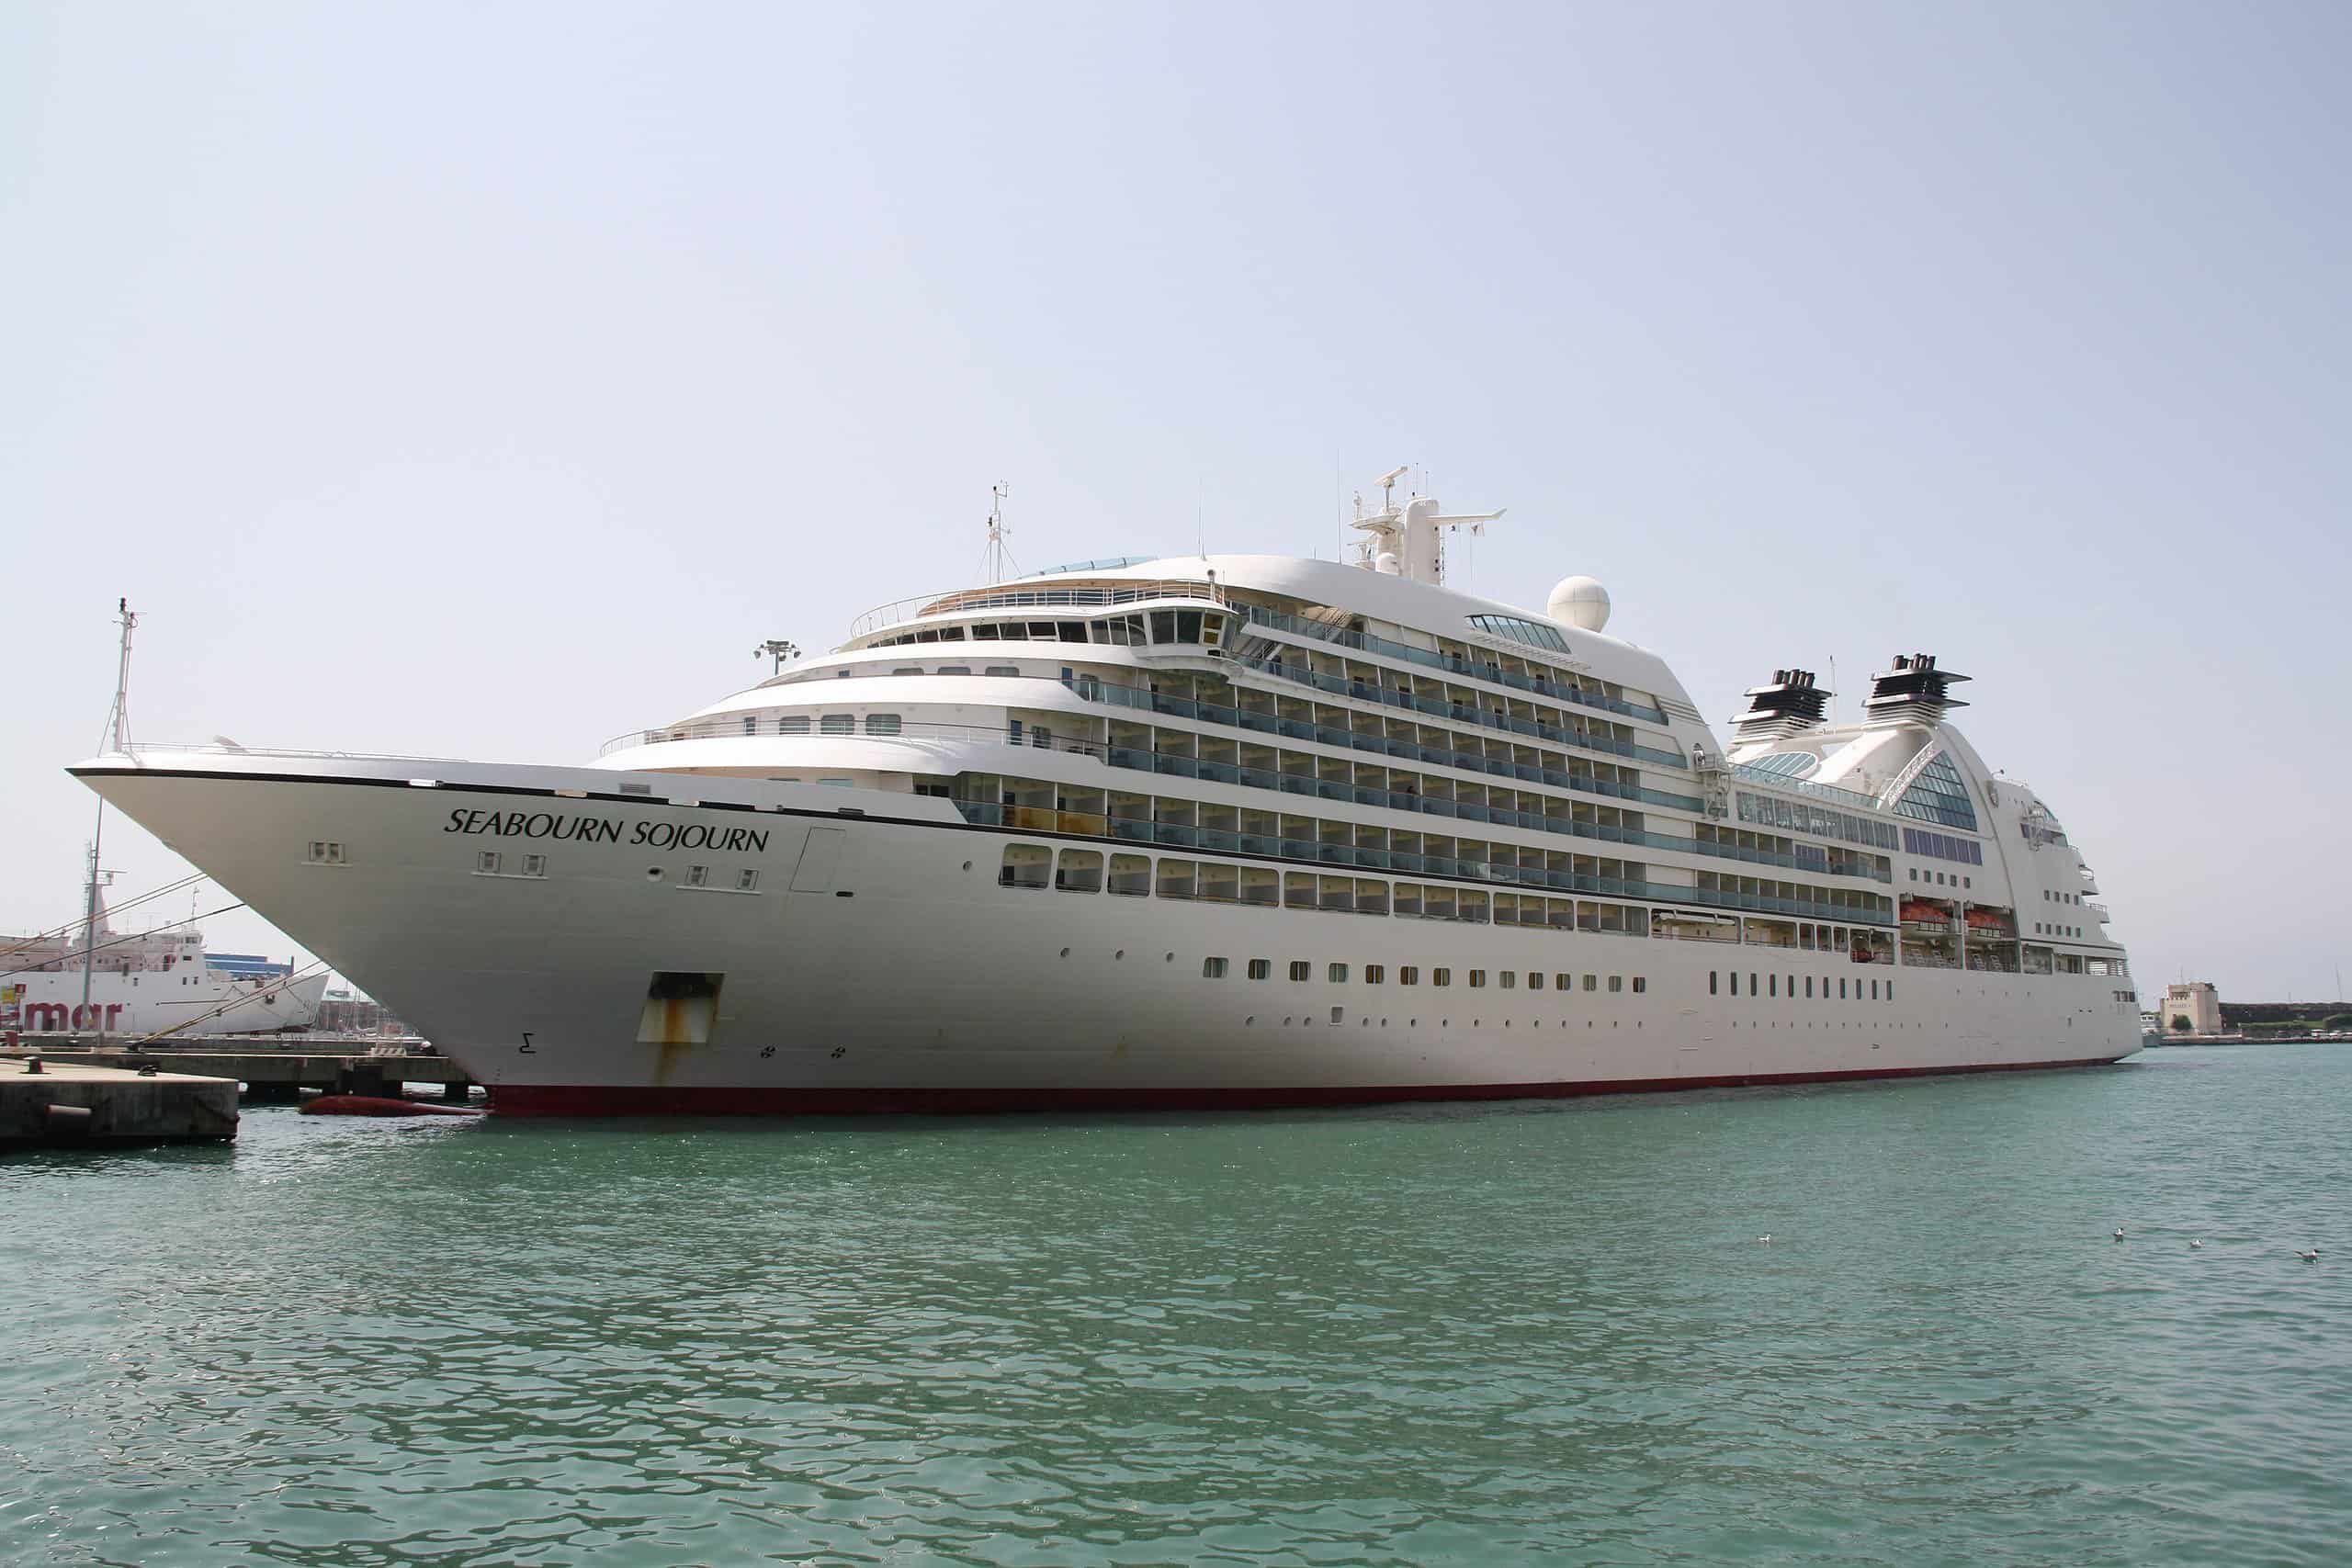 <p>There are very few trips that will make you feel as luxurious while showing you exotic locations like the 129-day trip on the Seabourn Sojourn. Starting at $196,649 per person in the Owner's Suite or Above, you'll get plenty of wonderful amenities. Along with a dining area for four people, you'll have a full entertainment center, a granite-topped bathroom, as well as a personal steward.</p> <p>For the price, you can safely expect fine Egyptian cotton linens, personalized stationery and so much more. Suite guests also receive a selection of daily newspapers, wellness bags with workout gear, complimentary car service between the airport and ship as well as regular visits from the hotel manager.</p> <p>Agree with this? Hit the Thumbs Up button above. Disagree? Let us know in the comments with what you'd change.</p>